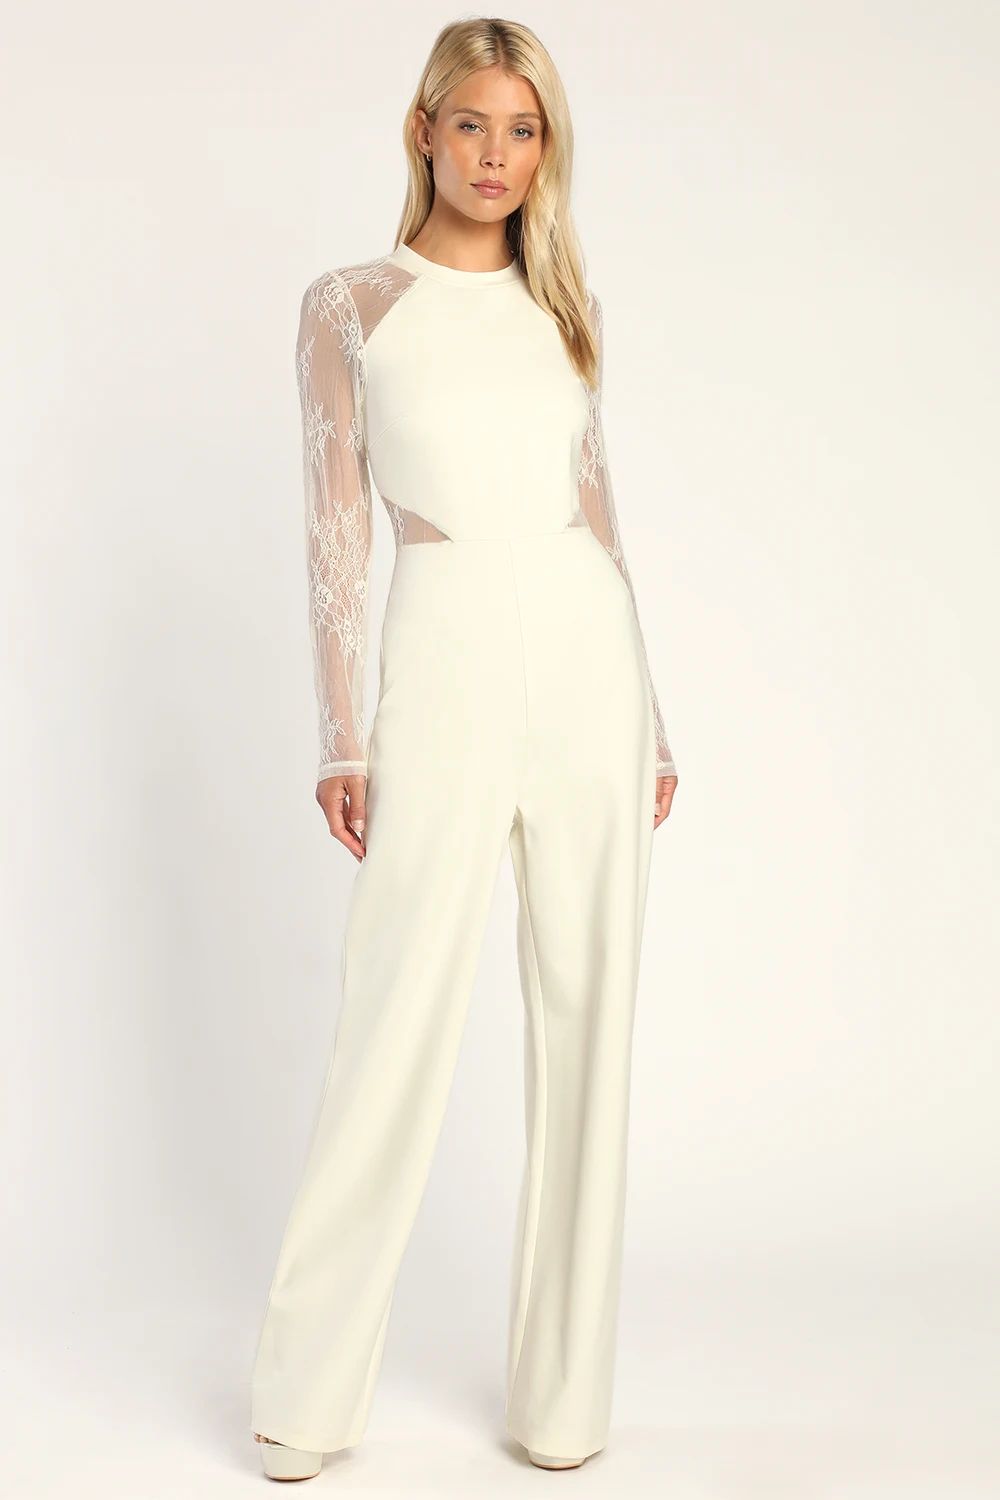 Infatuated With You Ivory Lace Long Sleeve Wide-Leg Jumpsuit | Lulus (US)